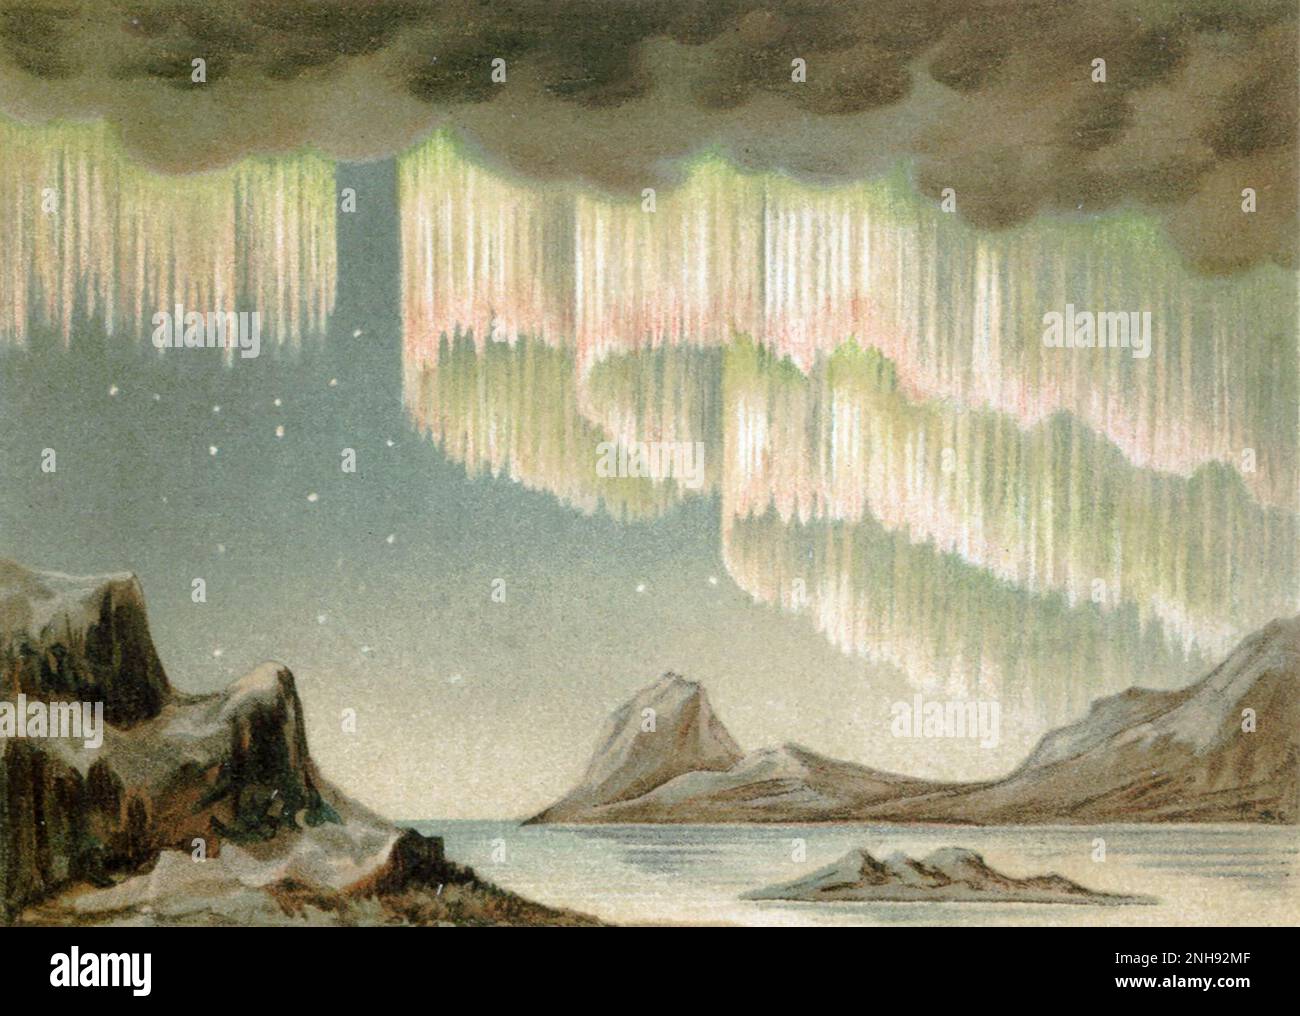 Chromolithograph with image of northern lights, circa 1908. Artist unknown. Stock Photo